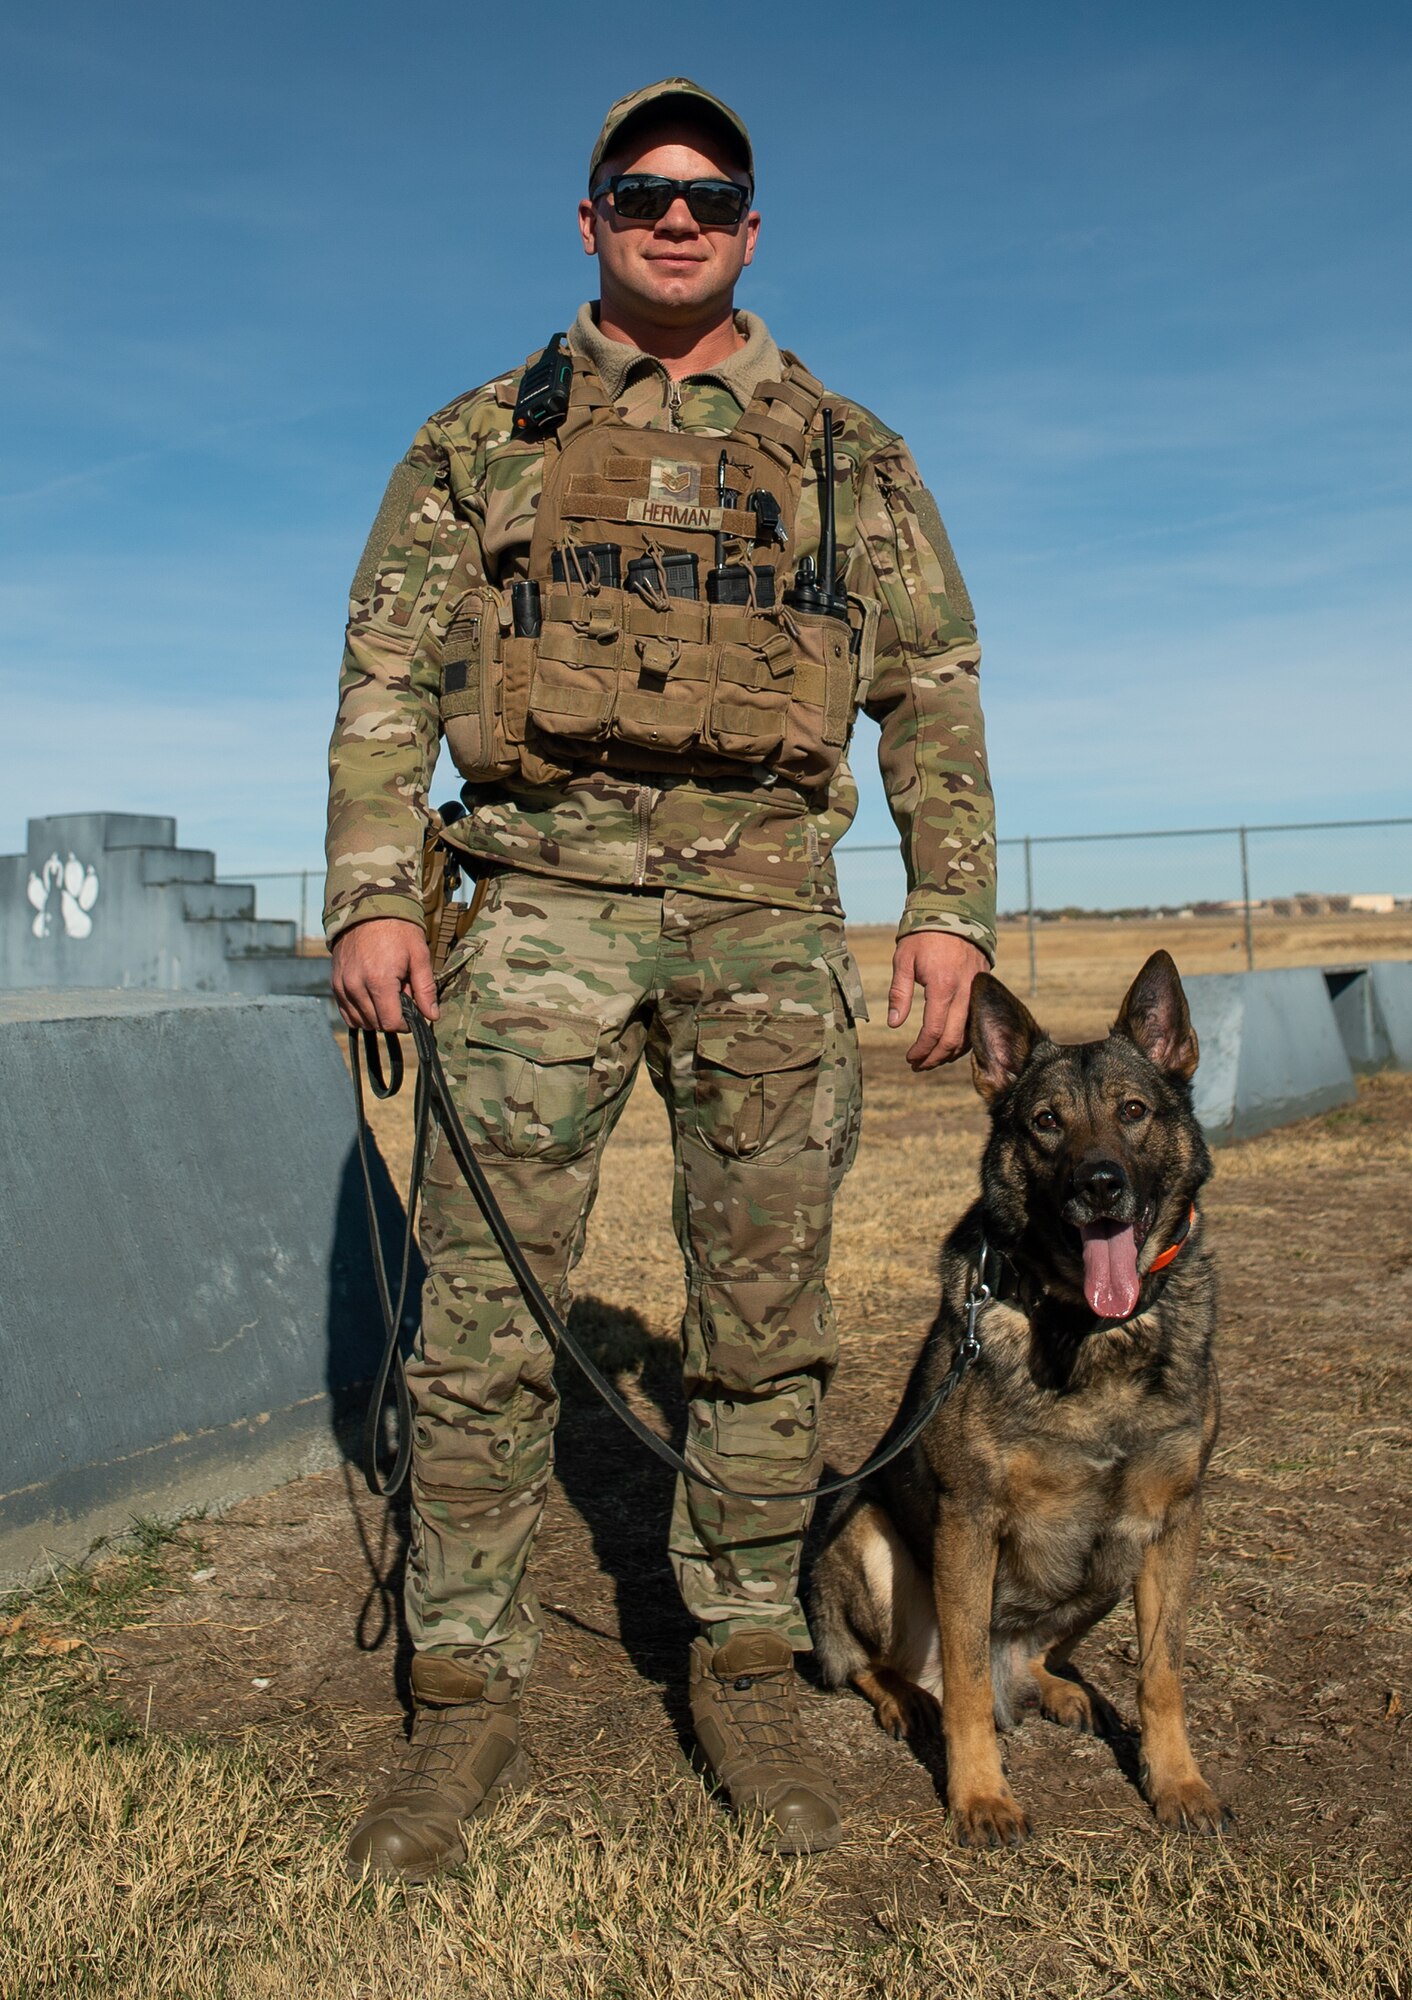 Military Working Dog Fulda W378, 27th Special Operations Security Forces Squadron K-9, stands with his handler and adopter U.S. Air Force Staff Sgt. Michael Herman, 27 SOSFS K-9 handler, at the K-9 training grounds on Cannon AFB, N.M., Nov. 15, 2021. MWD Fulda spent 7 years sniffing and searching for explosive materials to ensure the safety of service members worldwide. (U.S. Air Force photo by Senior Airman Christopher Storer)